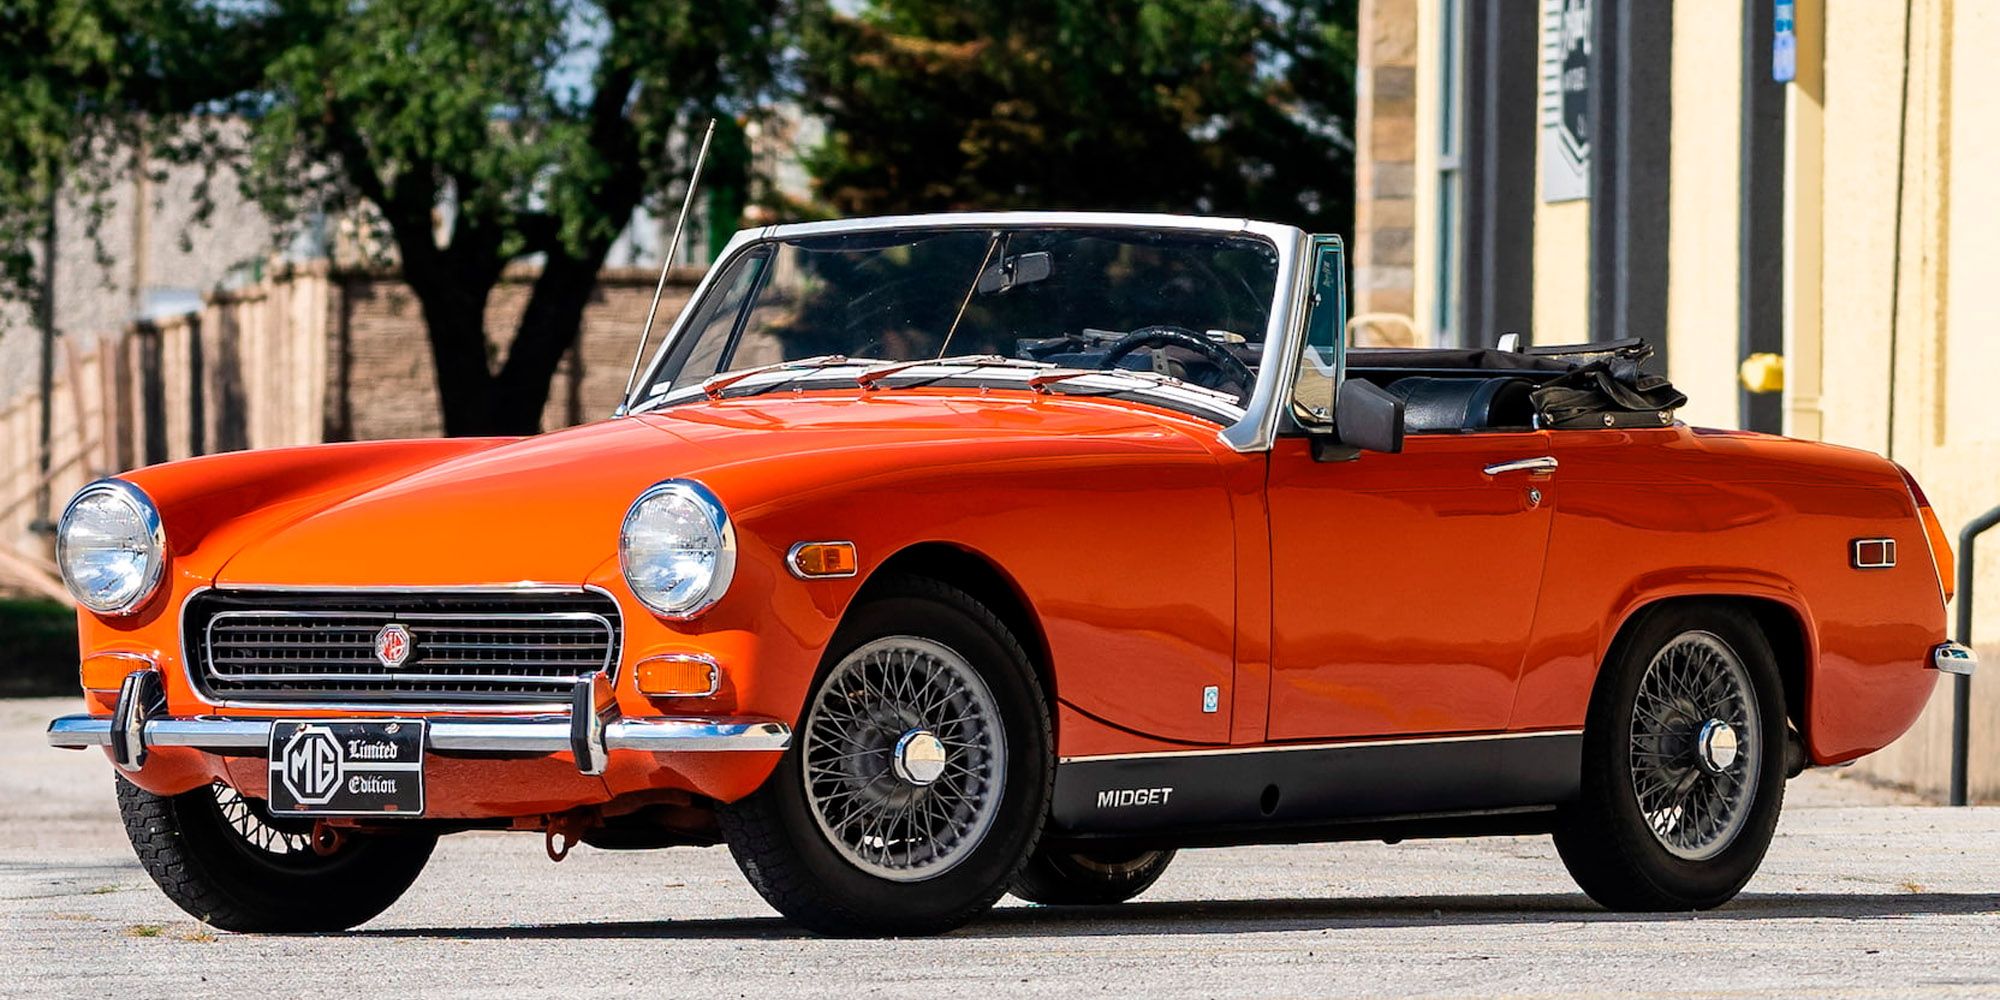 The front of an orange MG Midget